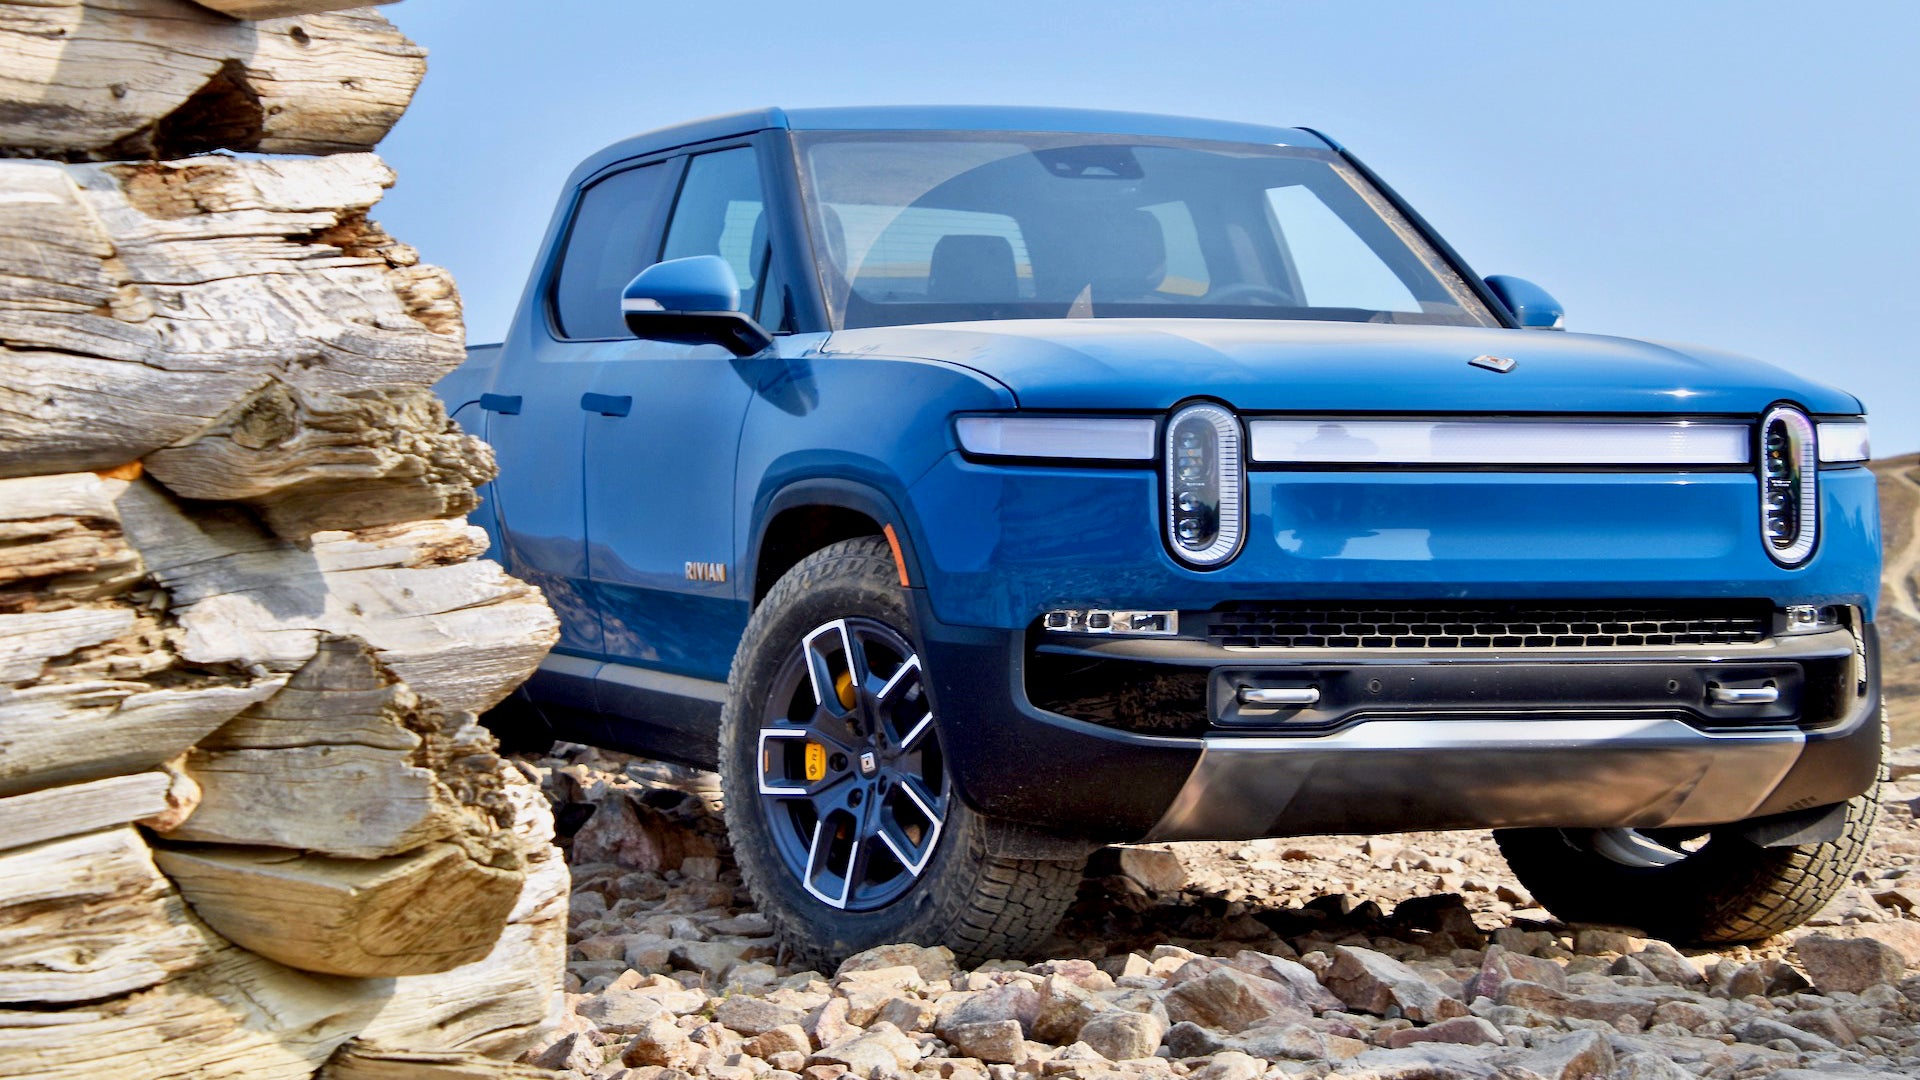 For Uninterrupted Power: Why The Rivian R1T Is A Great Choice For Those Who Need To Park Their Car